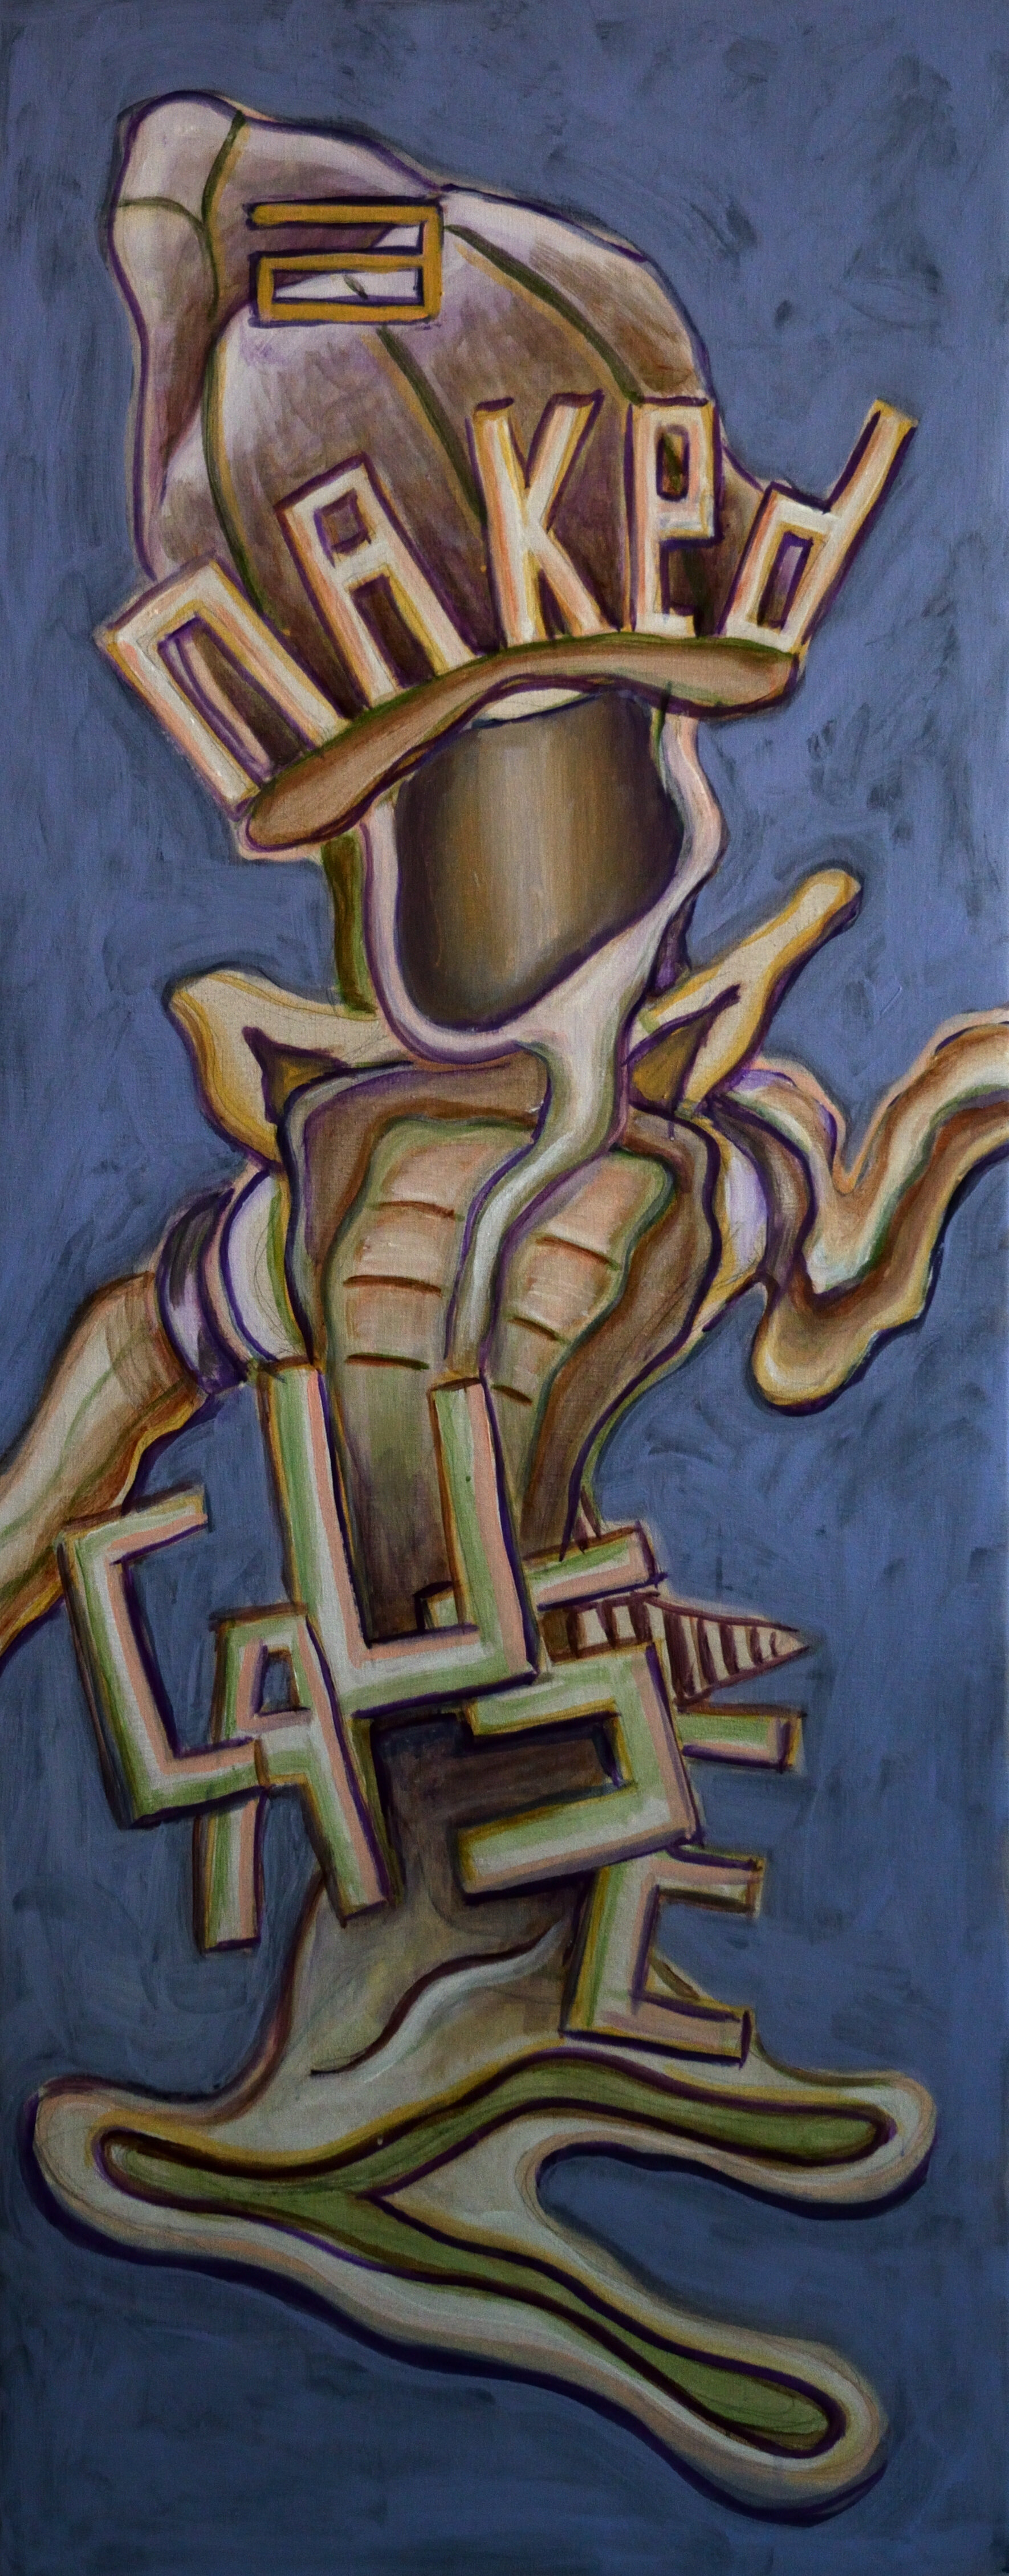 A Naked Cause, acrylic on canvas